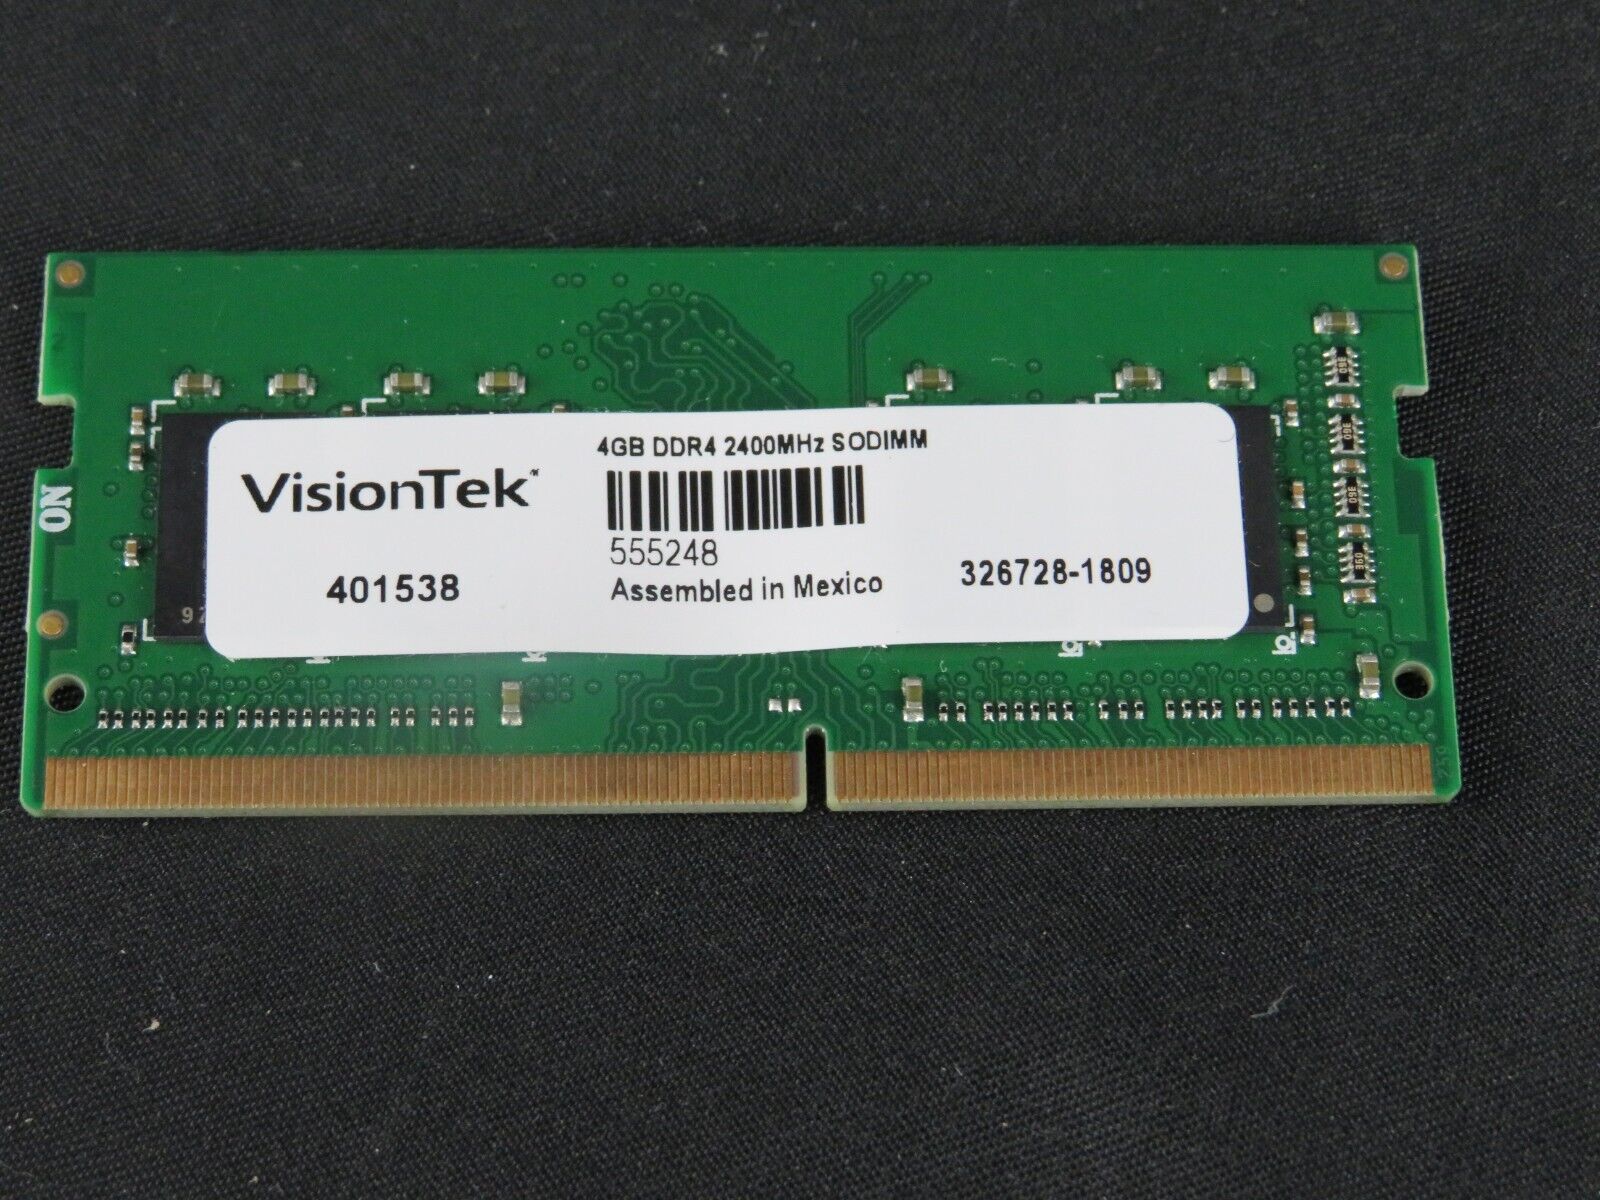 VisionTek 4GB DDR4 2400MHz RAM Module - Reliable Performance for Your System